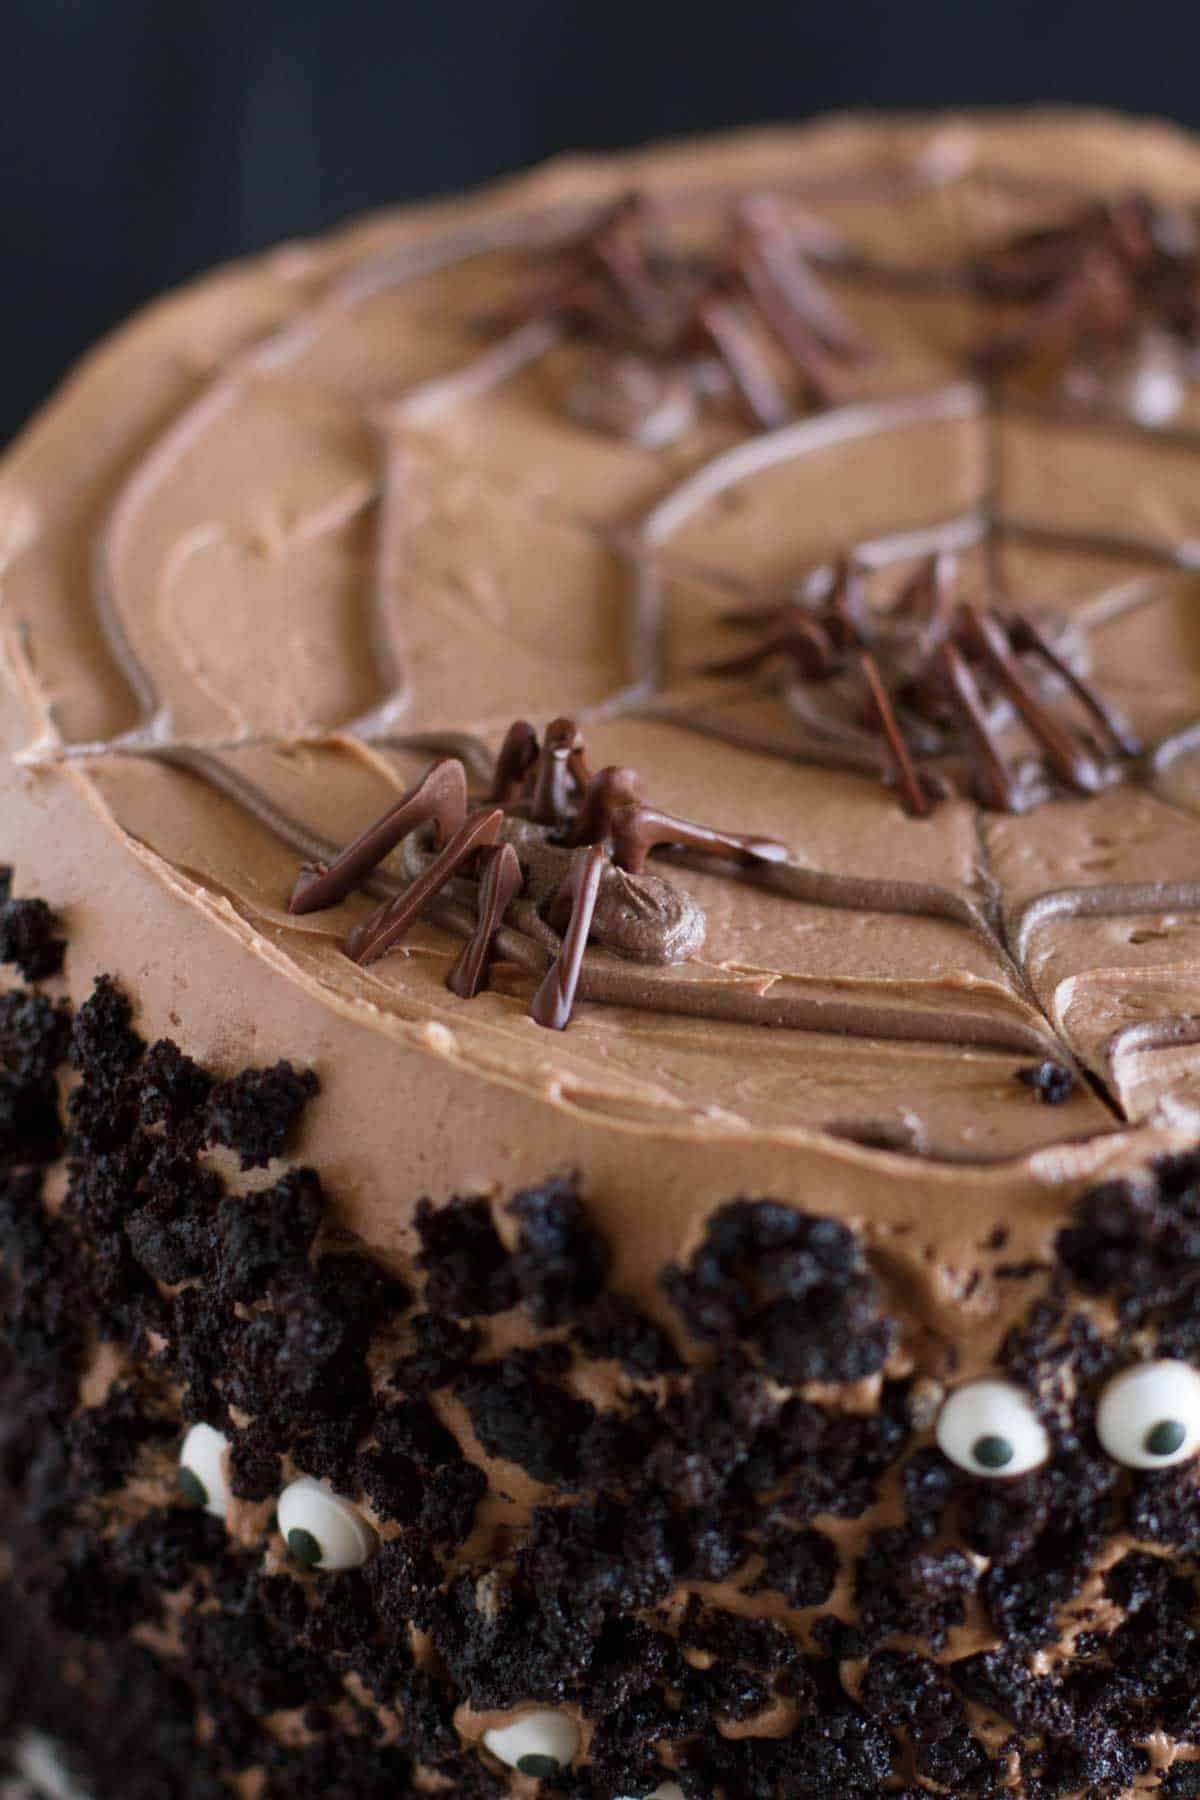 Halloween Cake Ideas - Dark Chocolate Cake with Nutella Buttercream with chocolate spiders on top.